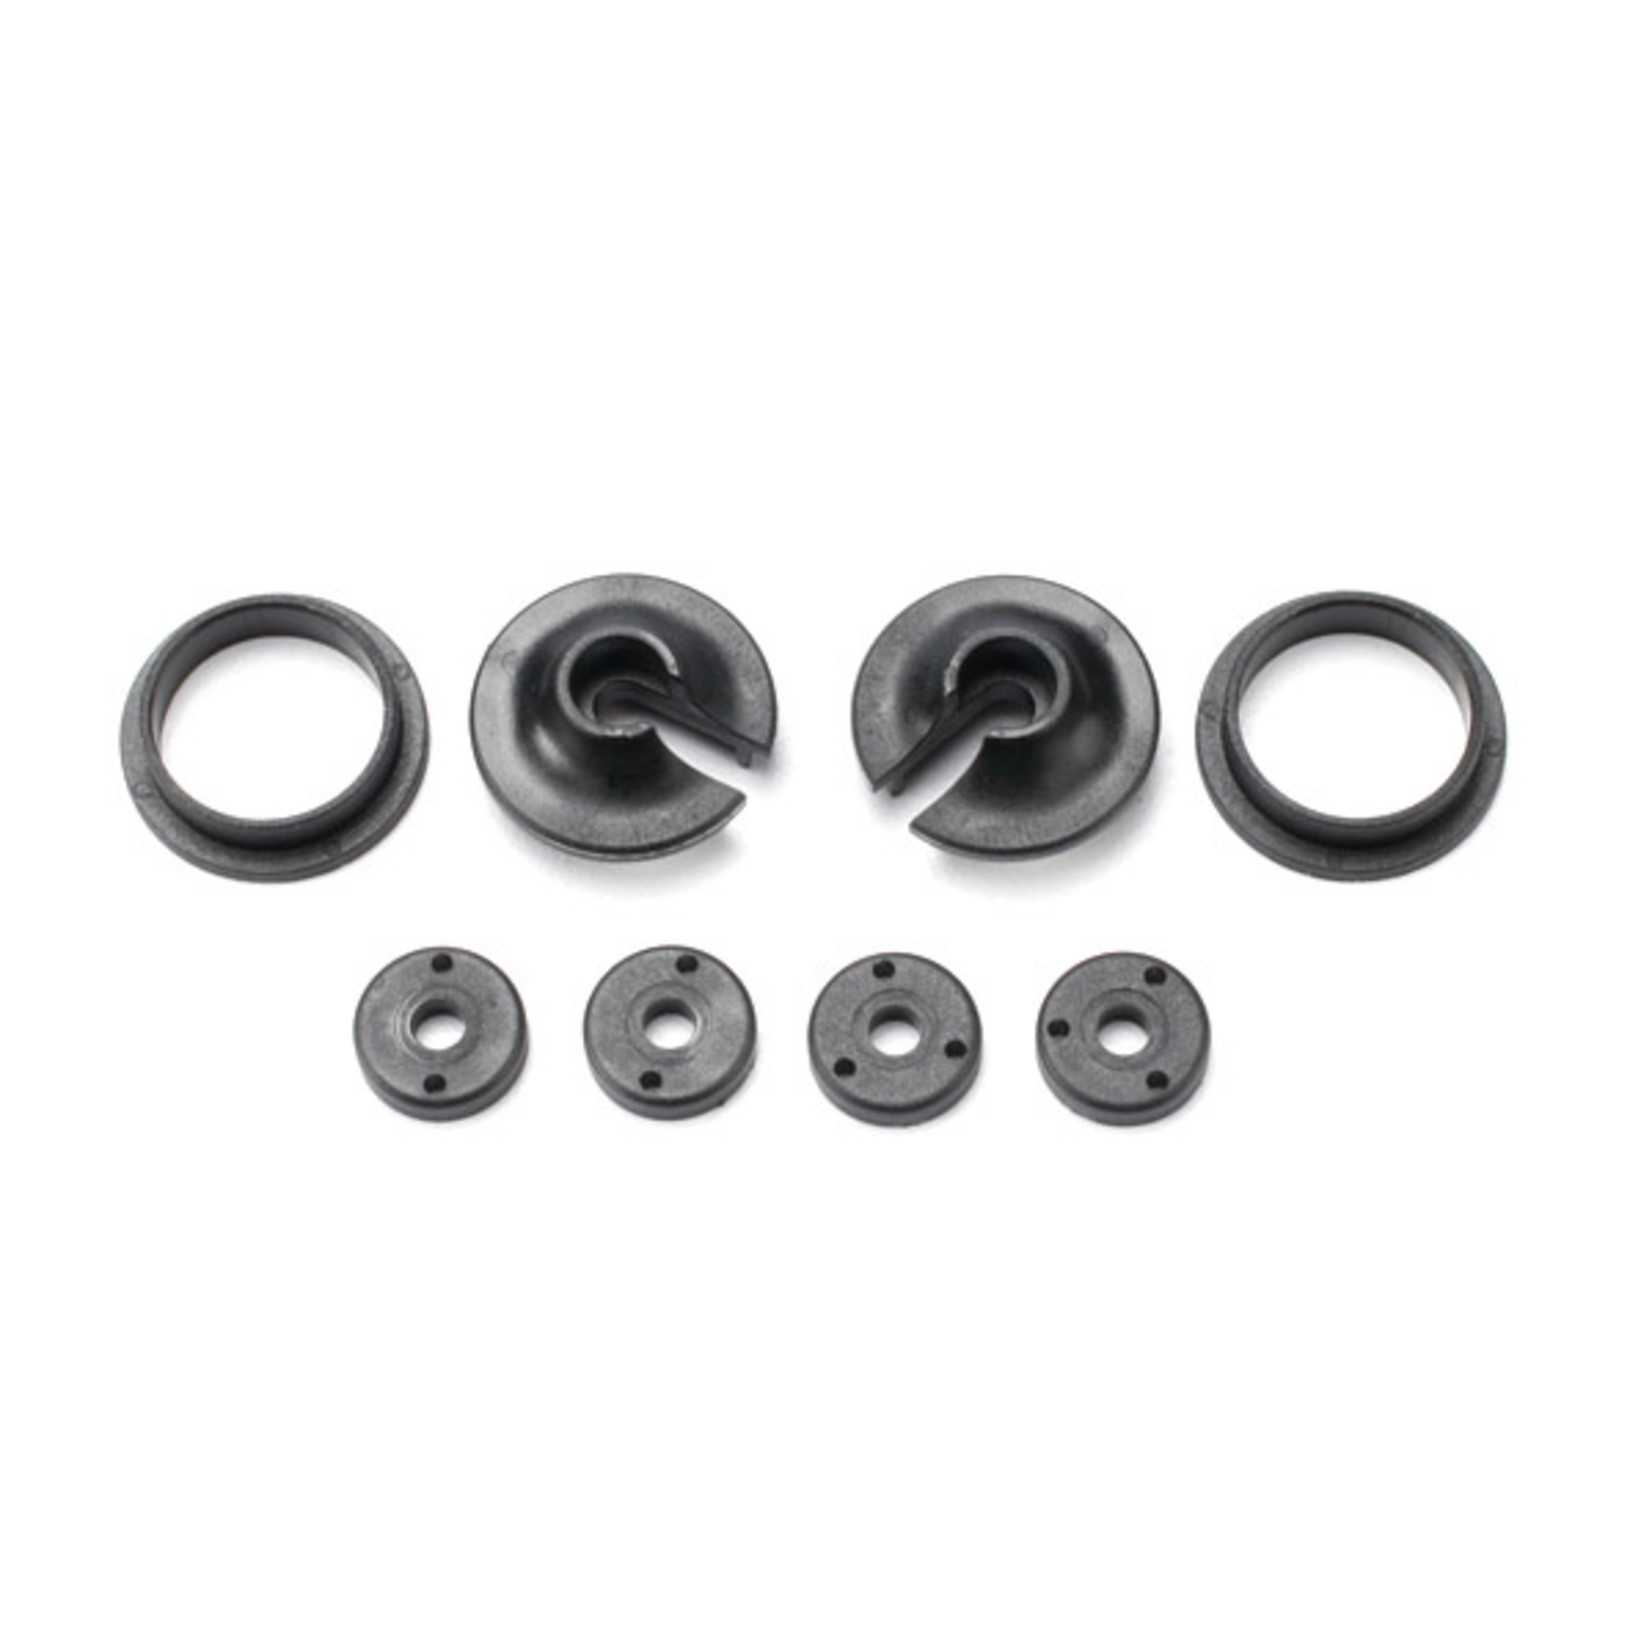 Traxxas 3768 - Spring retainers, upper & lower (2)/ piston